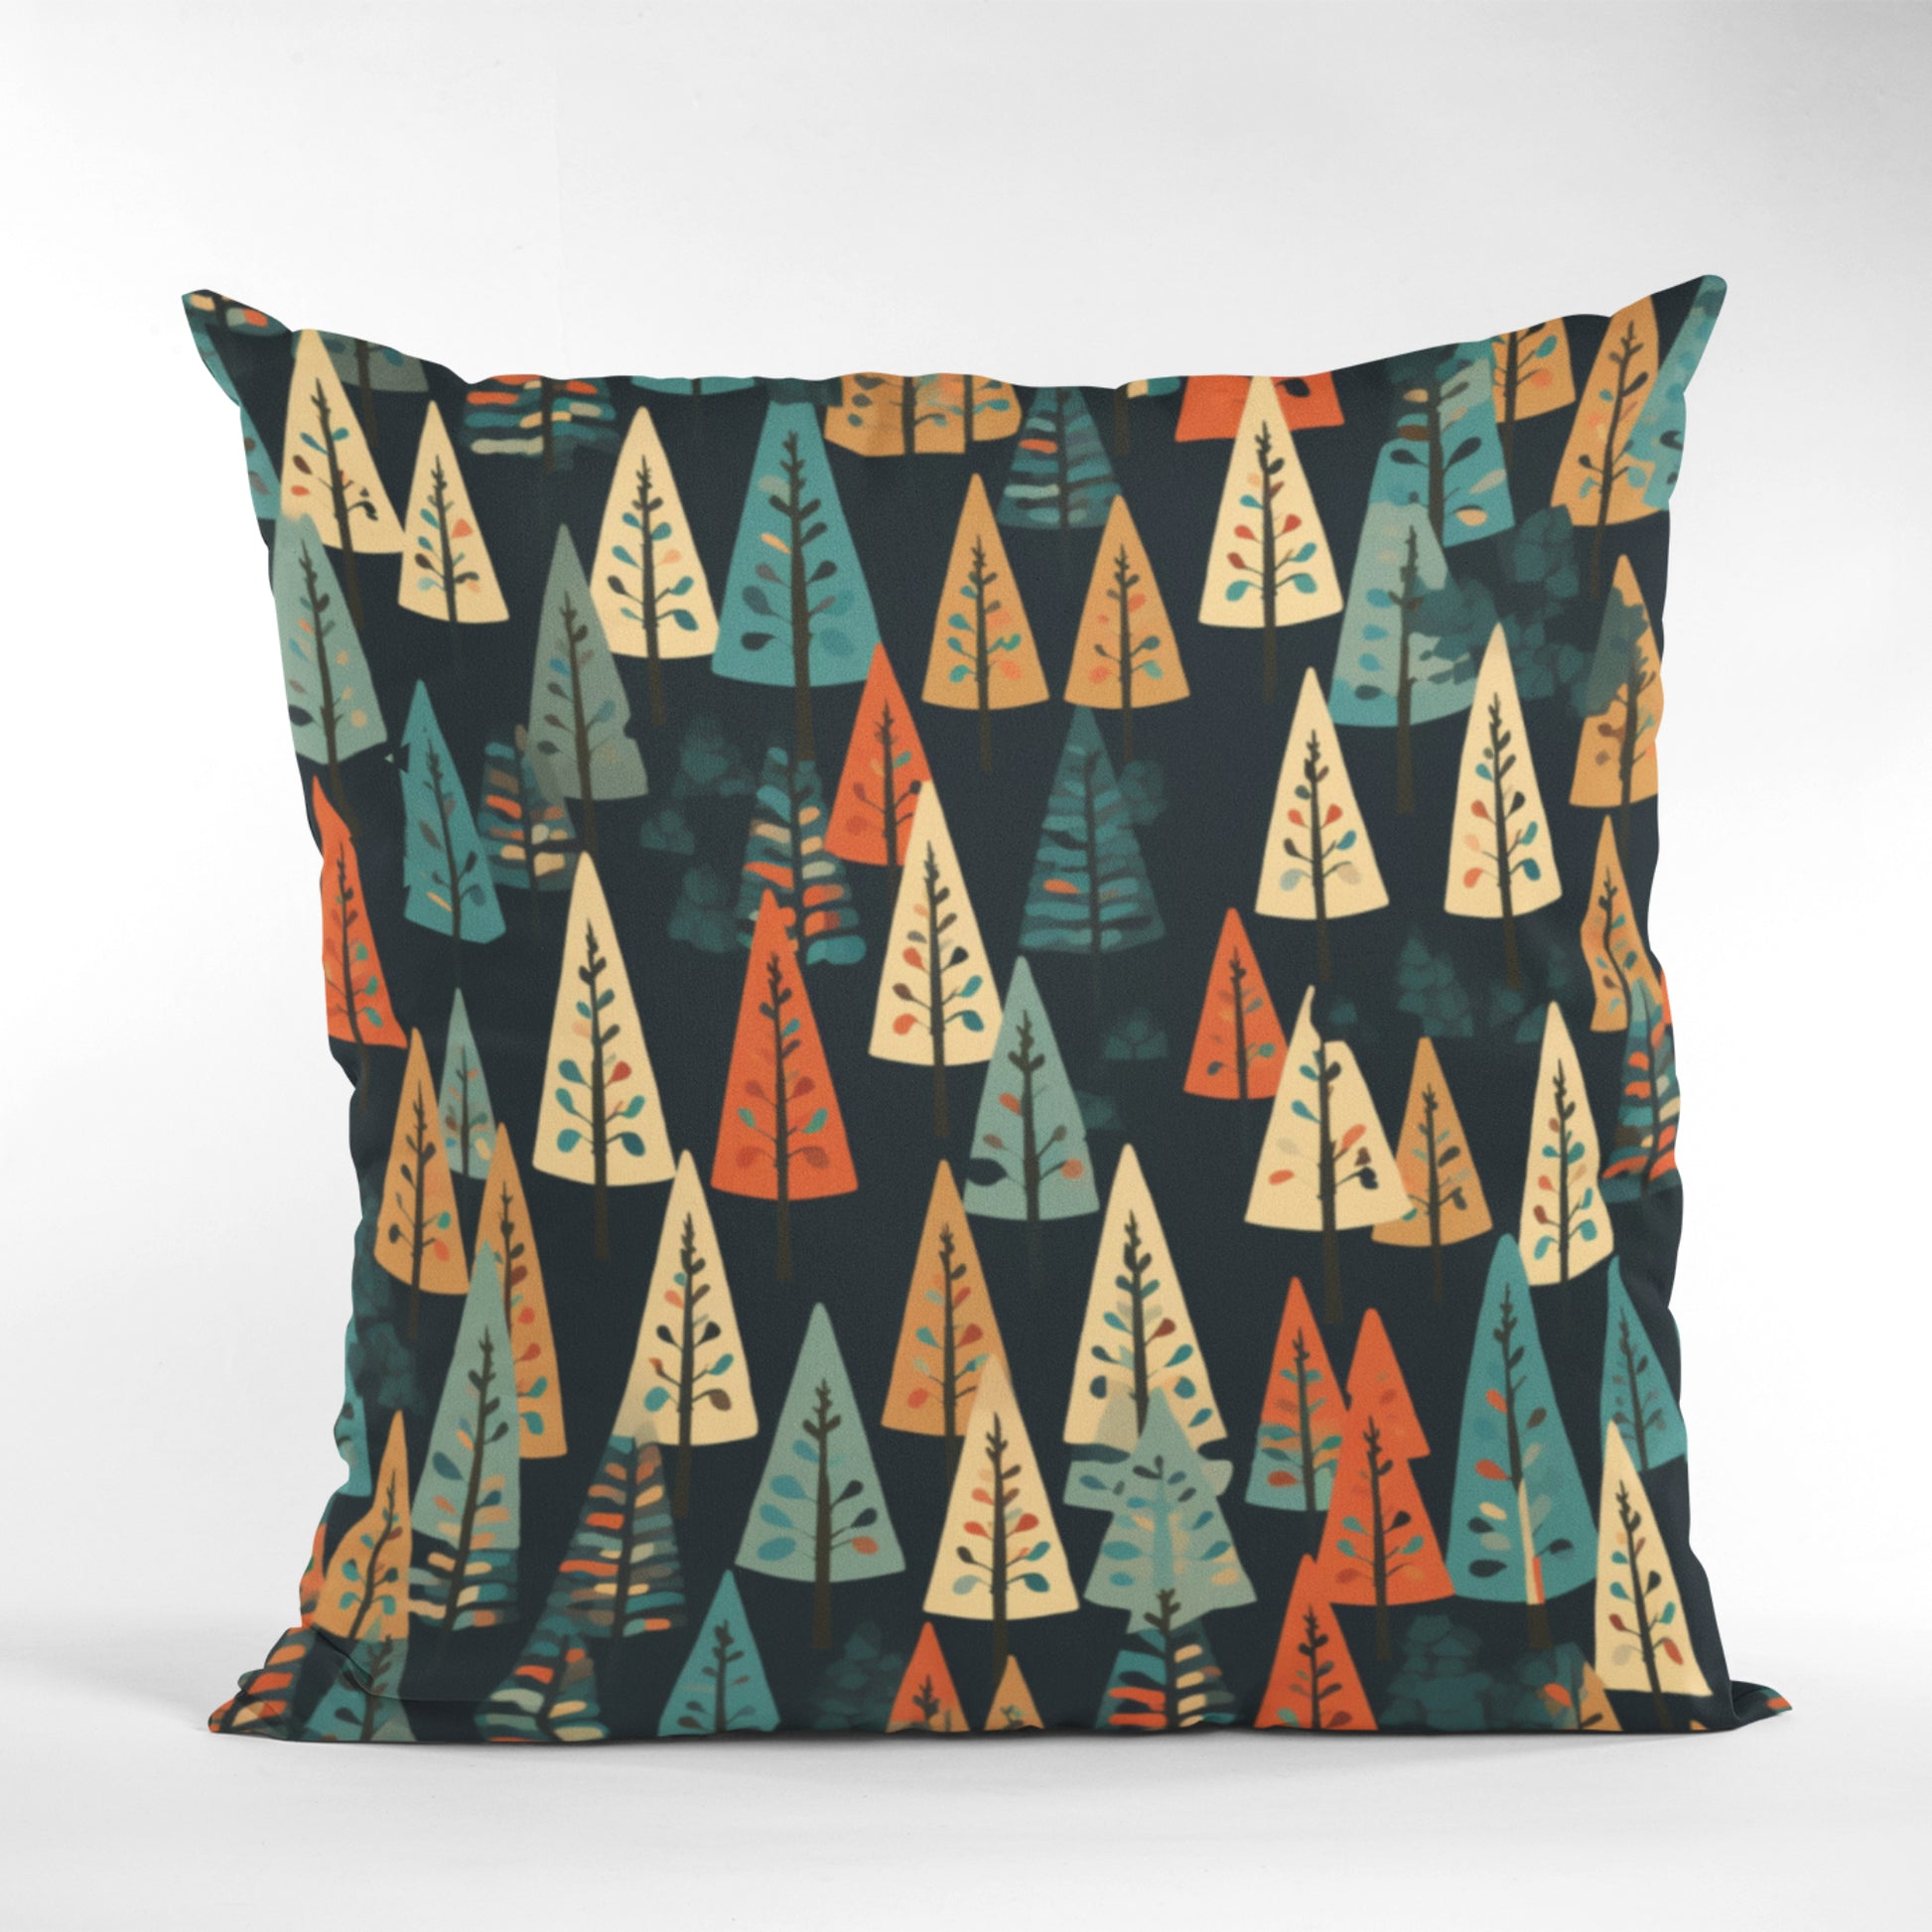 Cozy Pillow with a Winter Forest Design